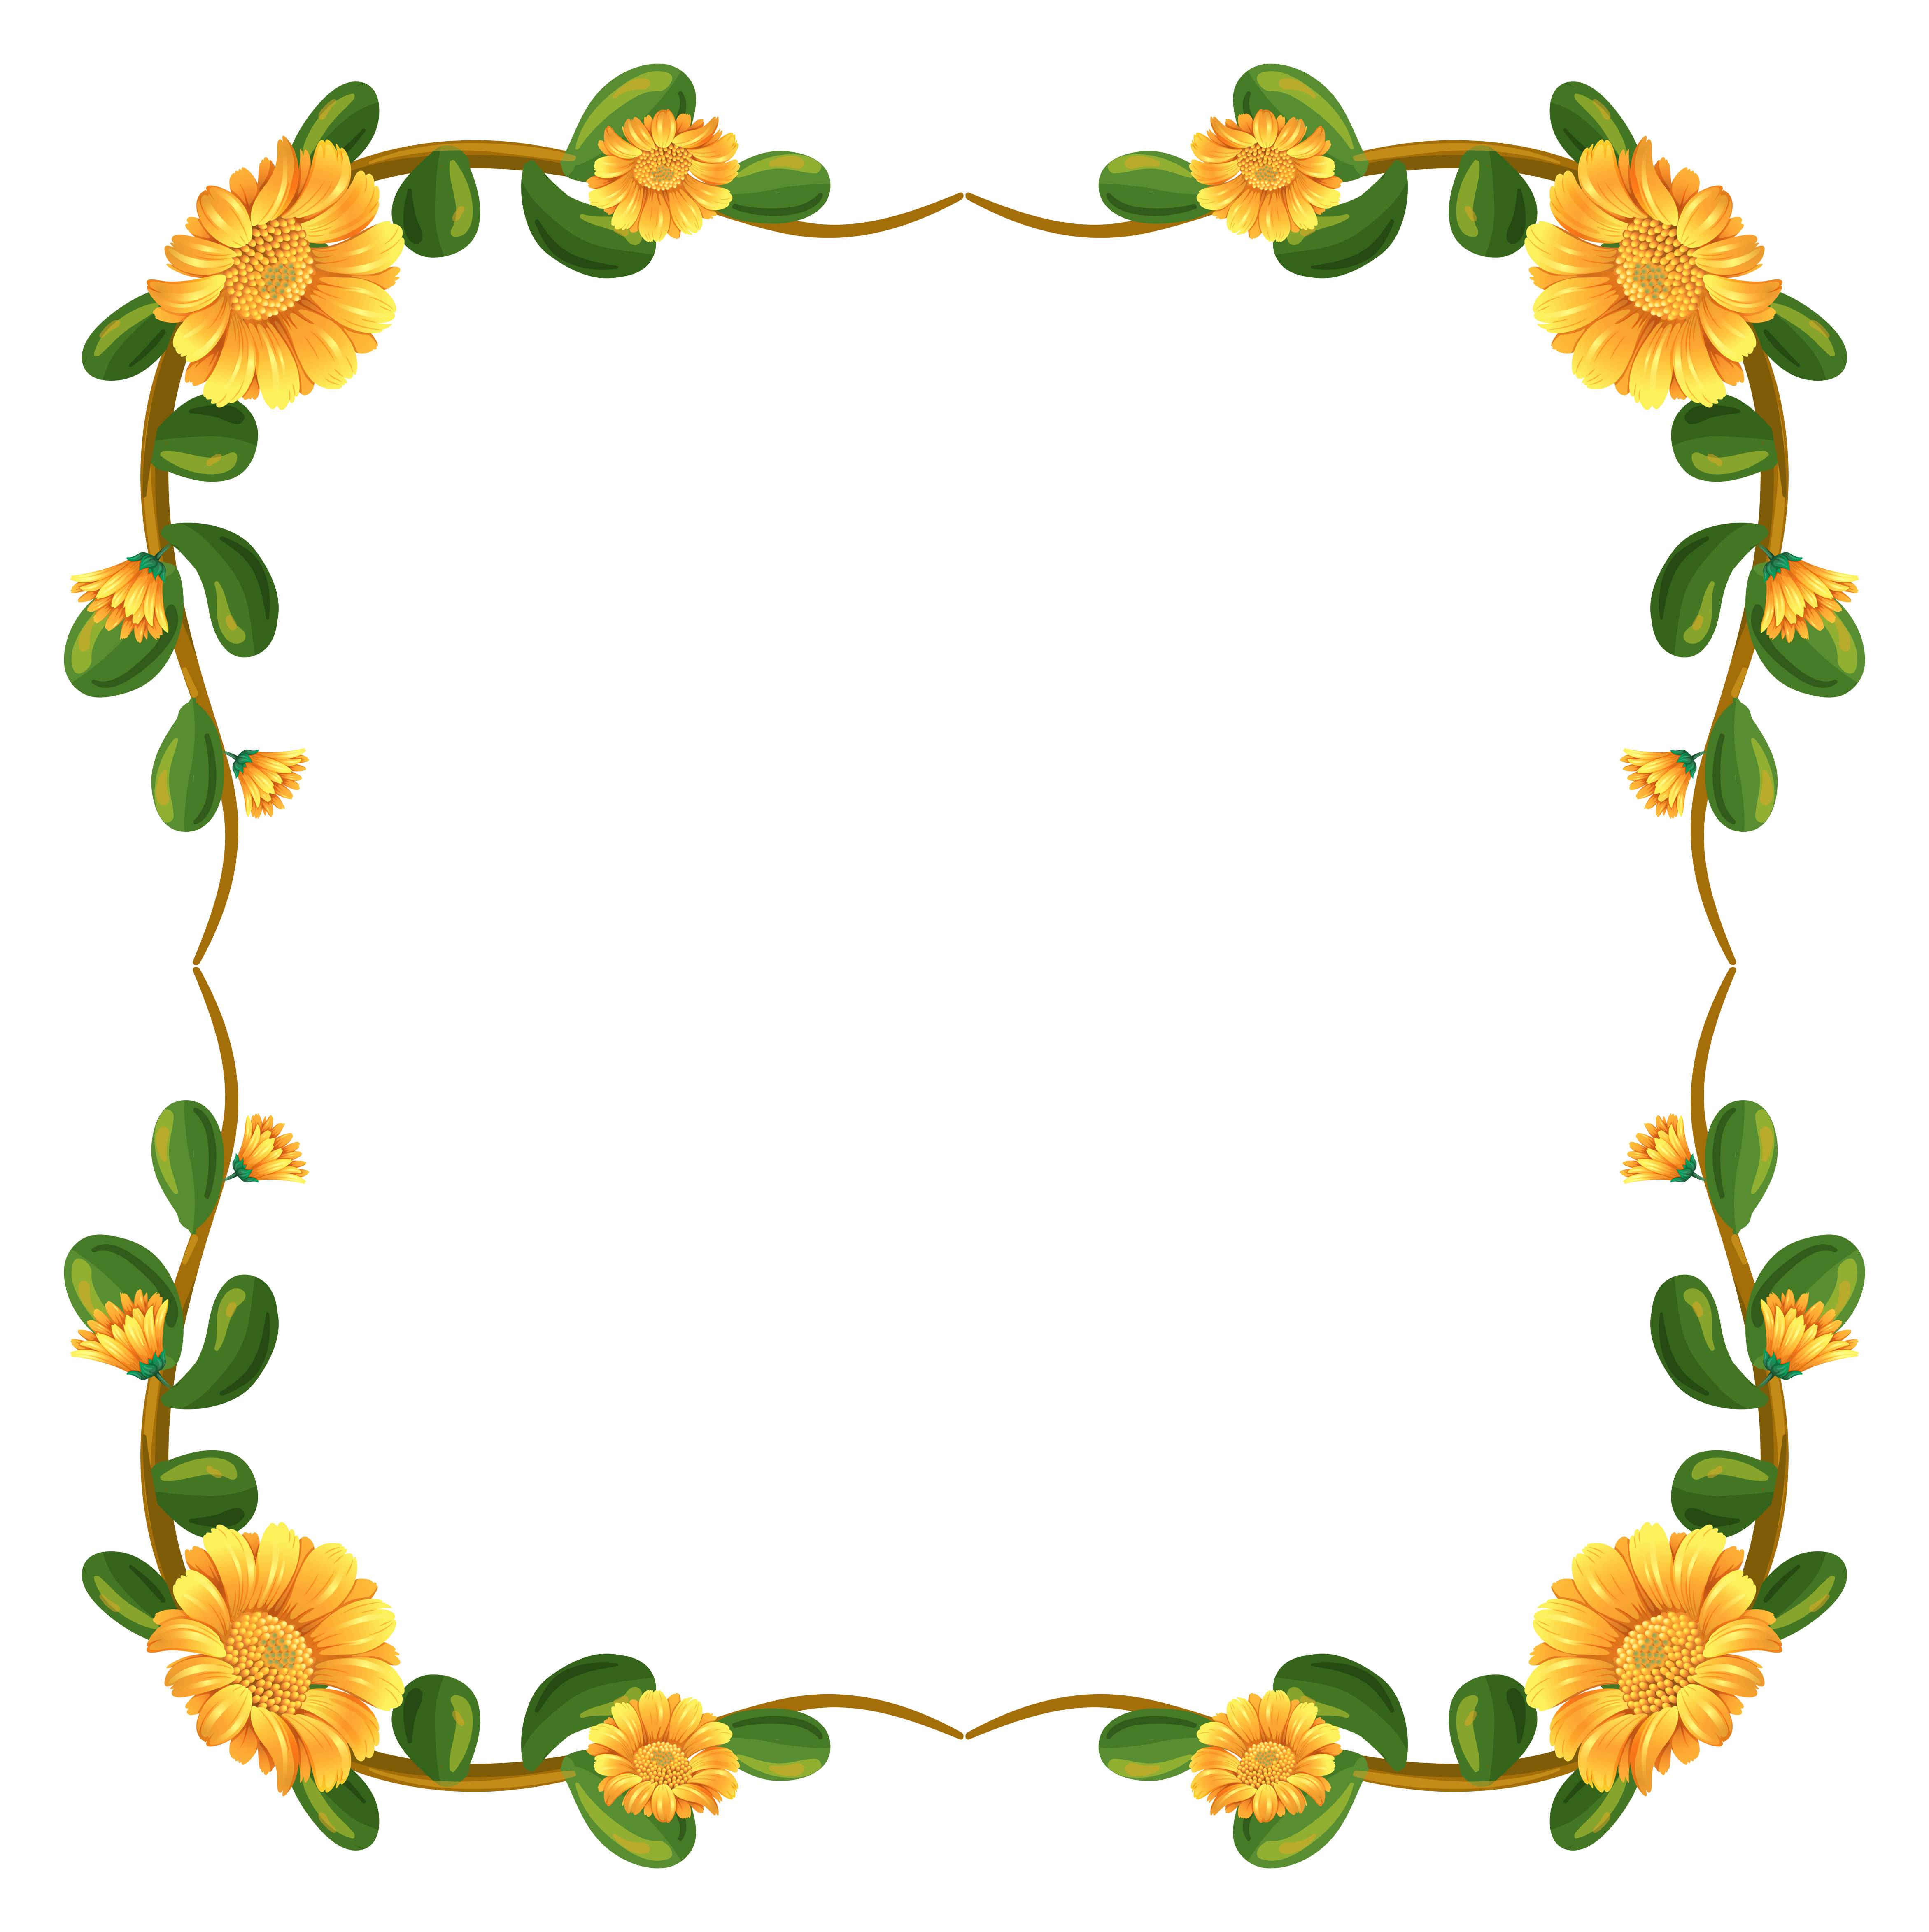 Download A floral border with yellow flowers - Download Free ...